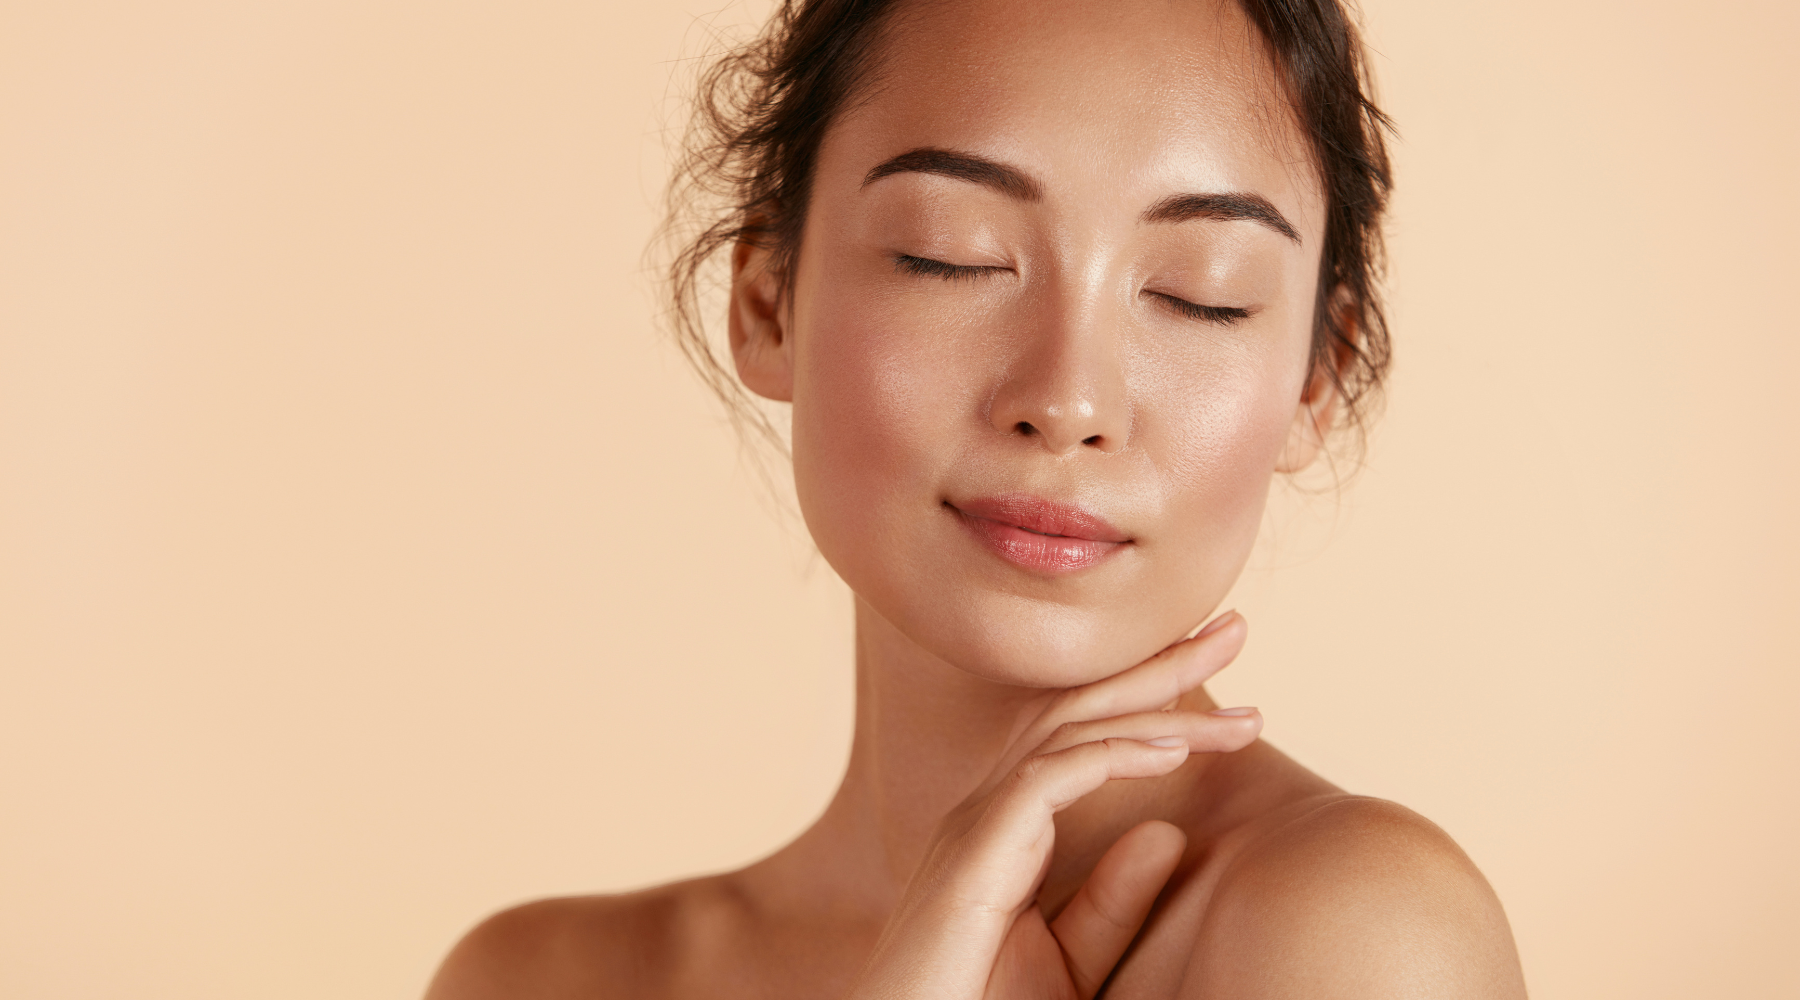 Ultimate Skin Guide: Understand the causes of breakouts, acne, dry skin and what to do about it